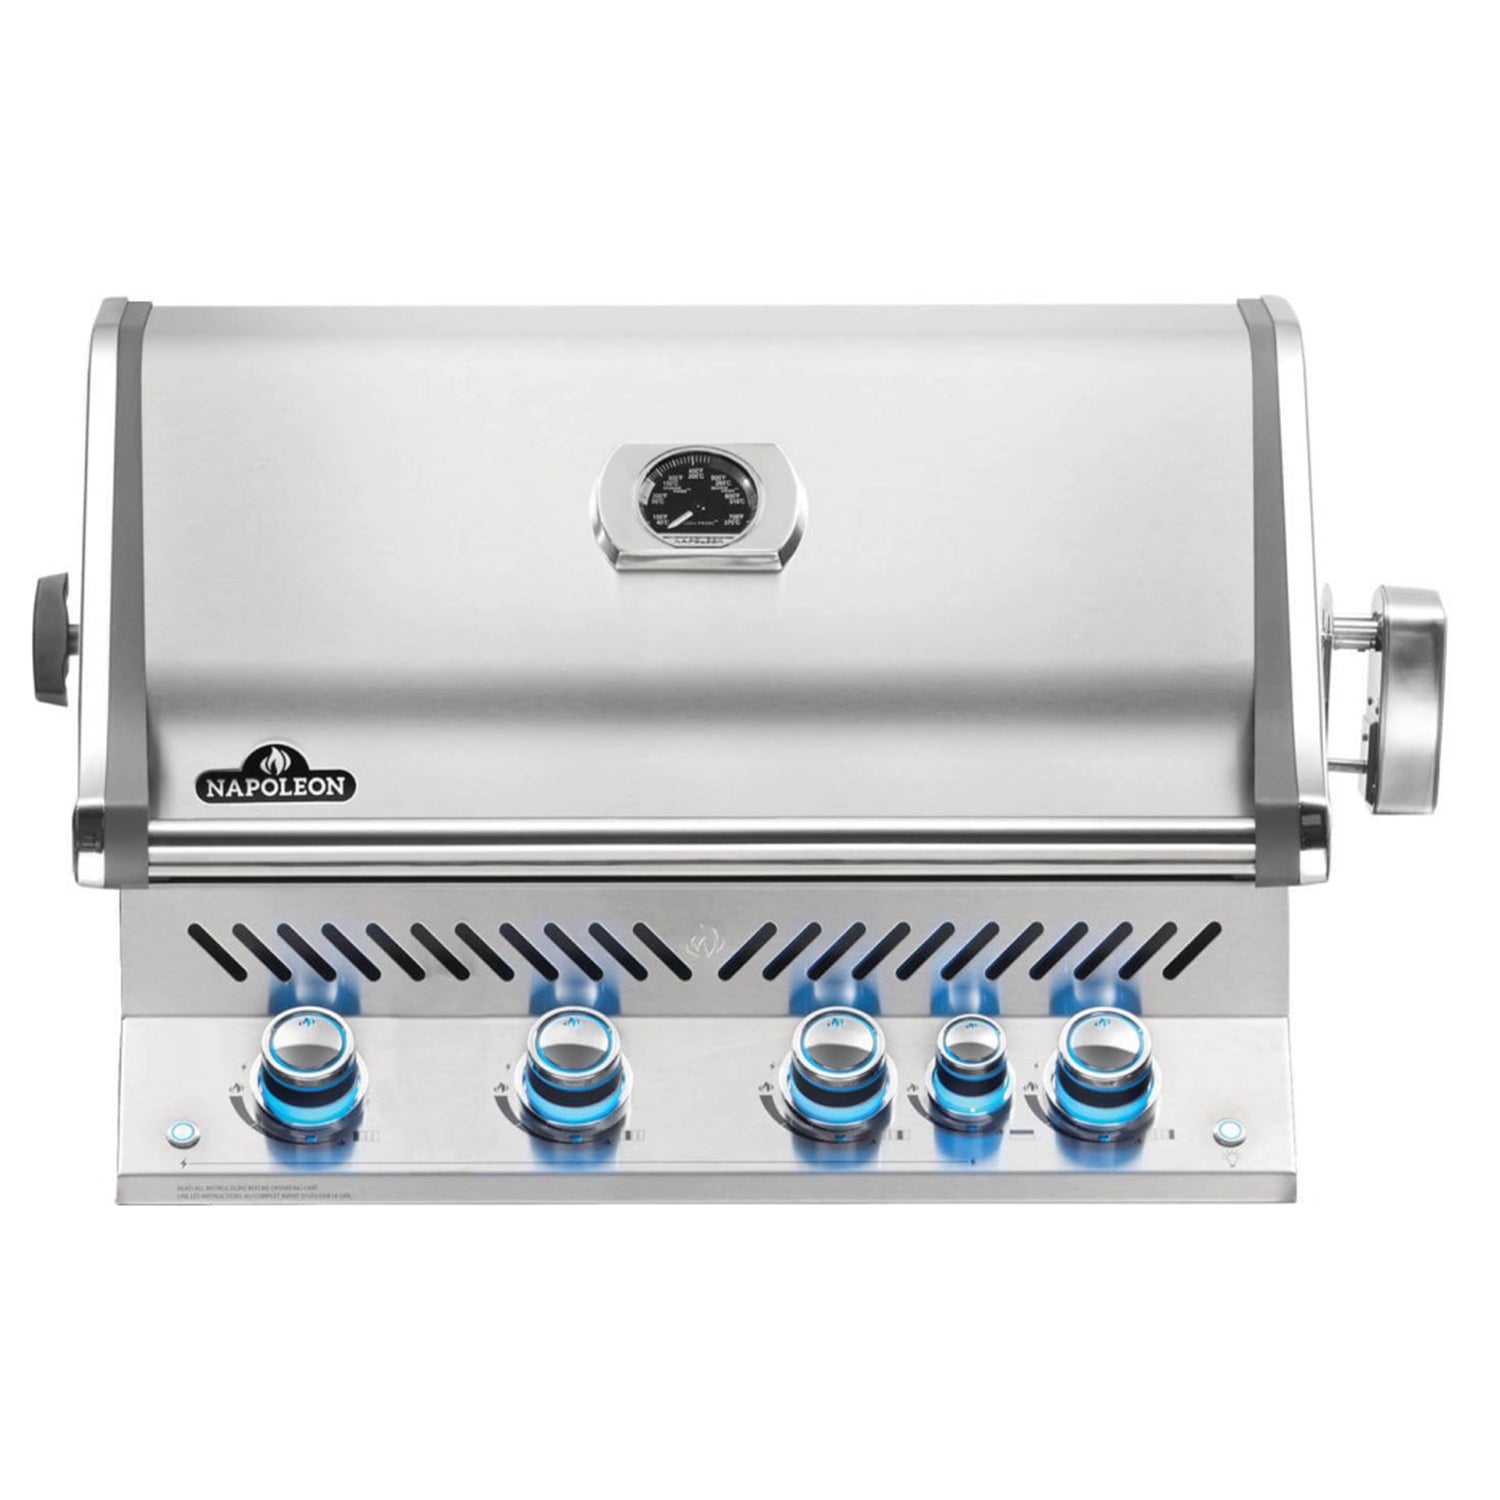 Napoleon Built-In Prestige 500 Propane Gas Grill (Stainless Steel) BIP500RBPSS-3